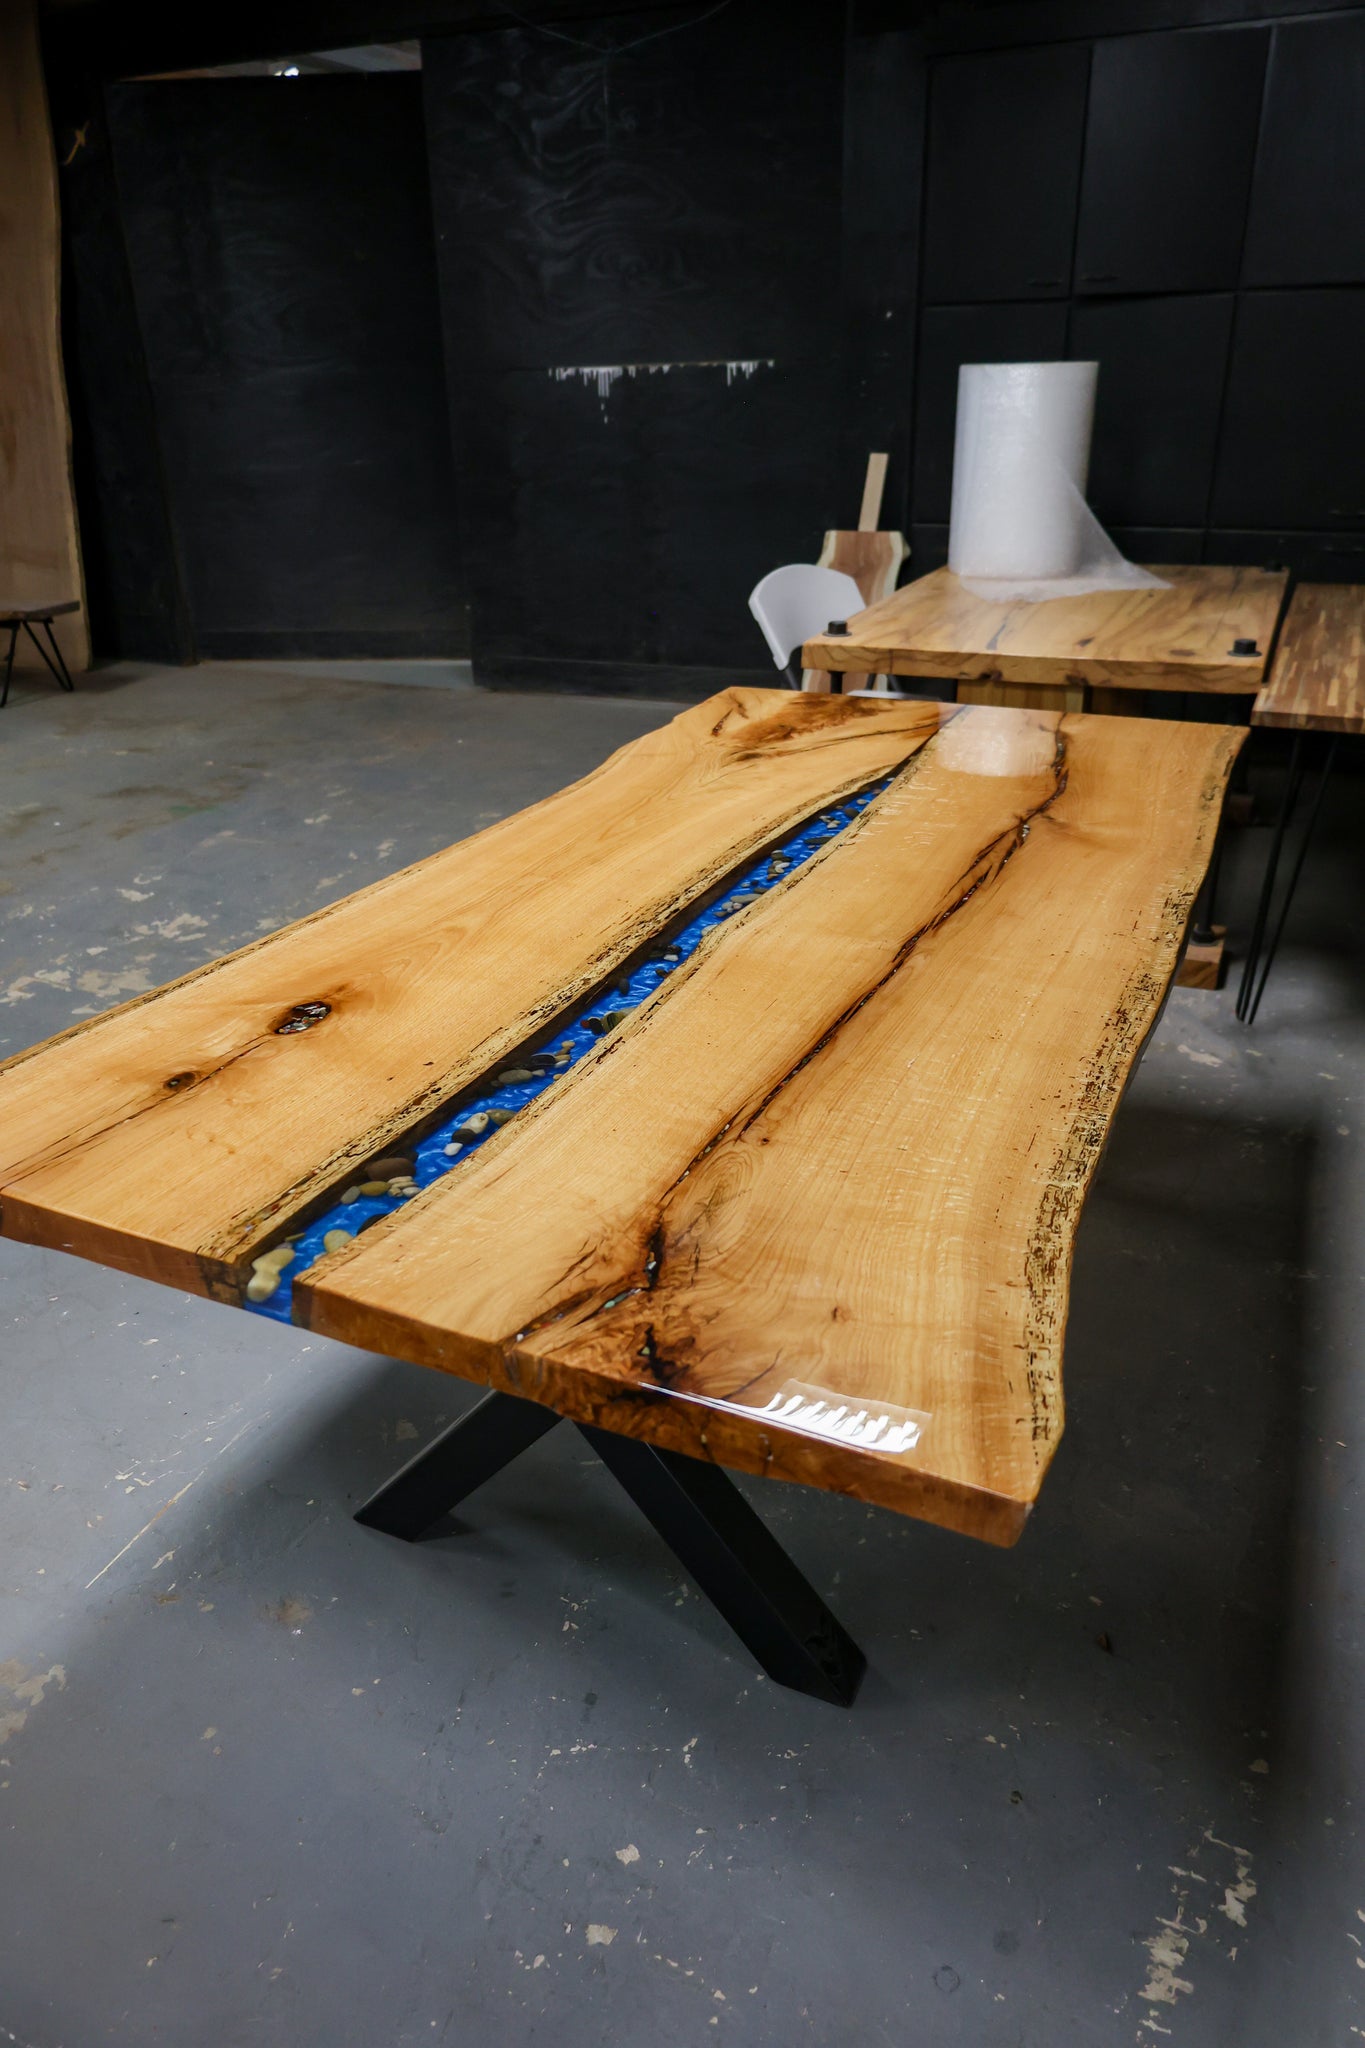 Oak River Table with Blue River and Earthtone Rocks - #65